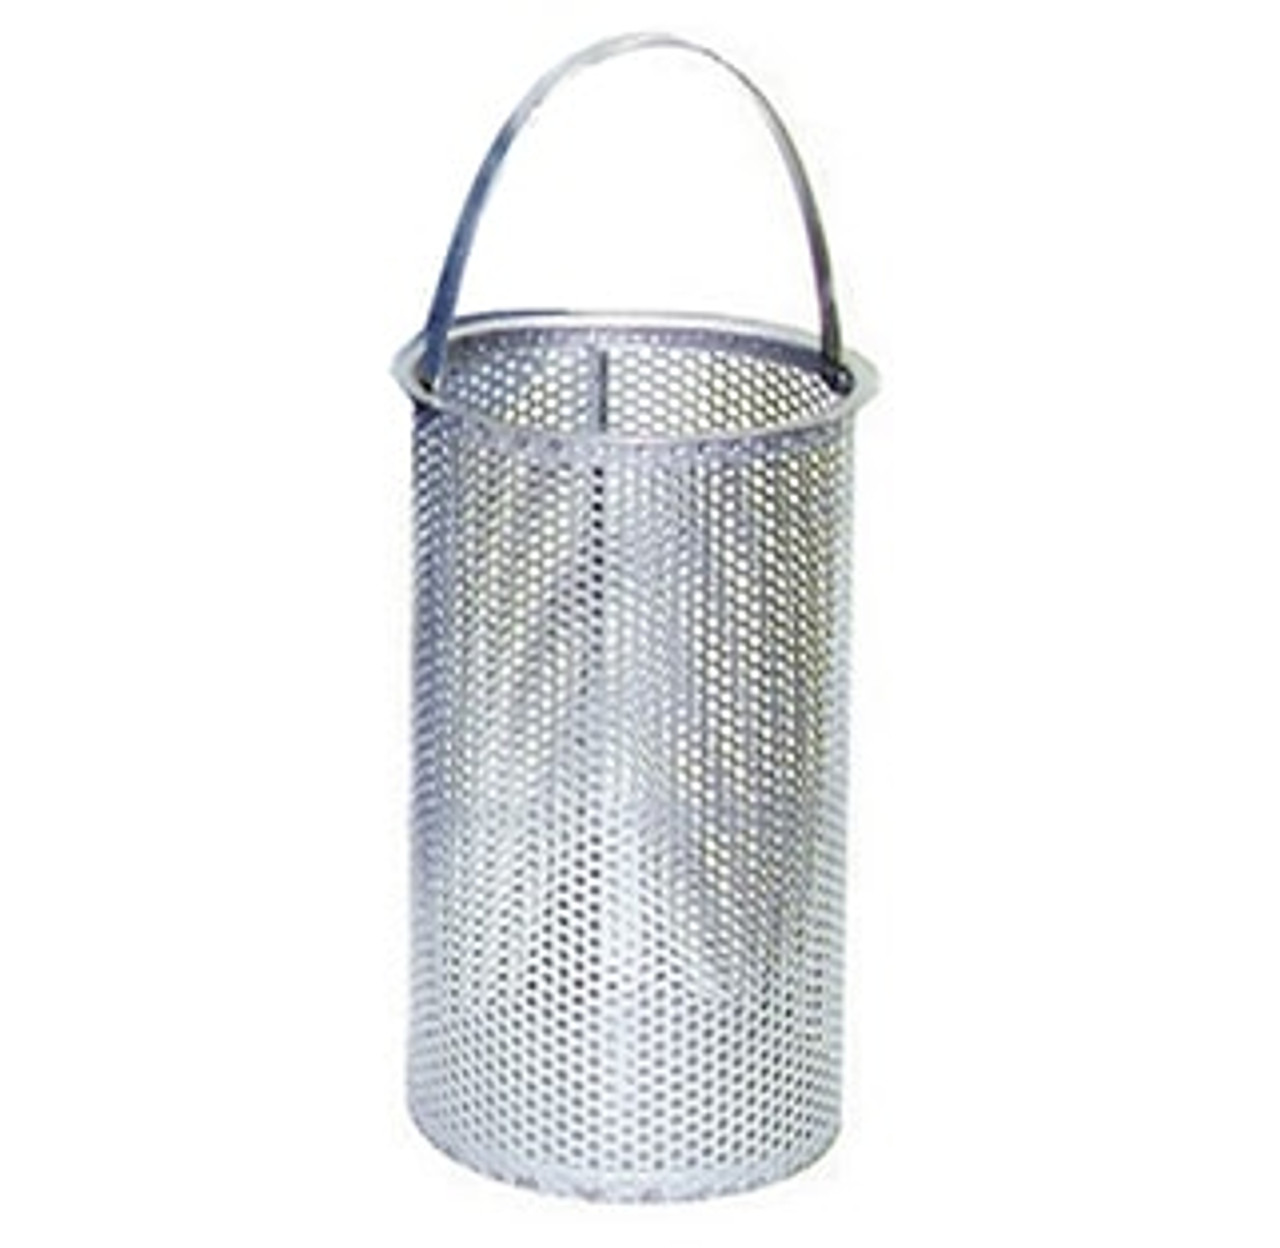 1/8" Perforated Replacement Basket for 3" Eaton Model 53BTX Strainer